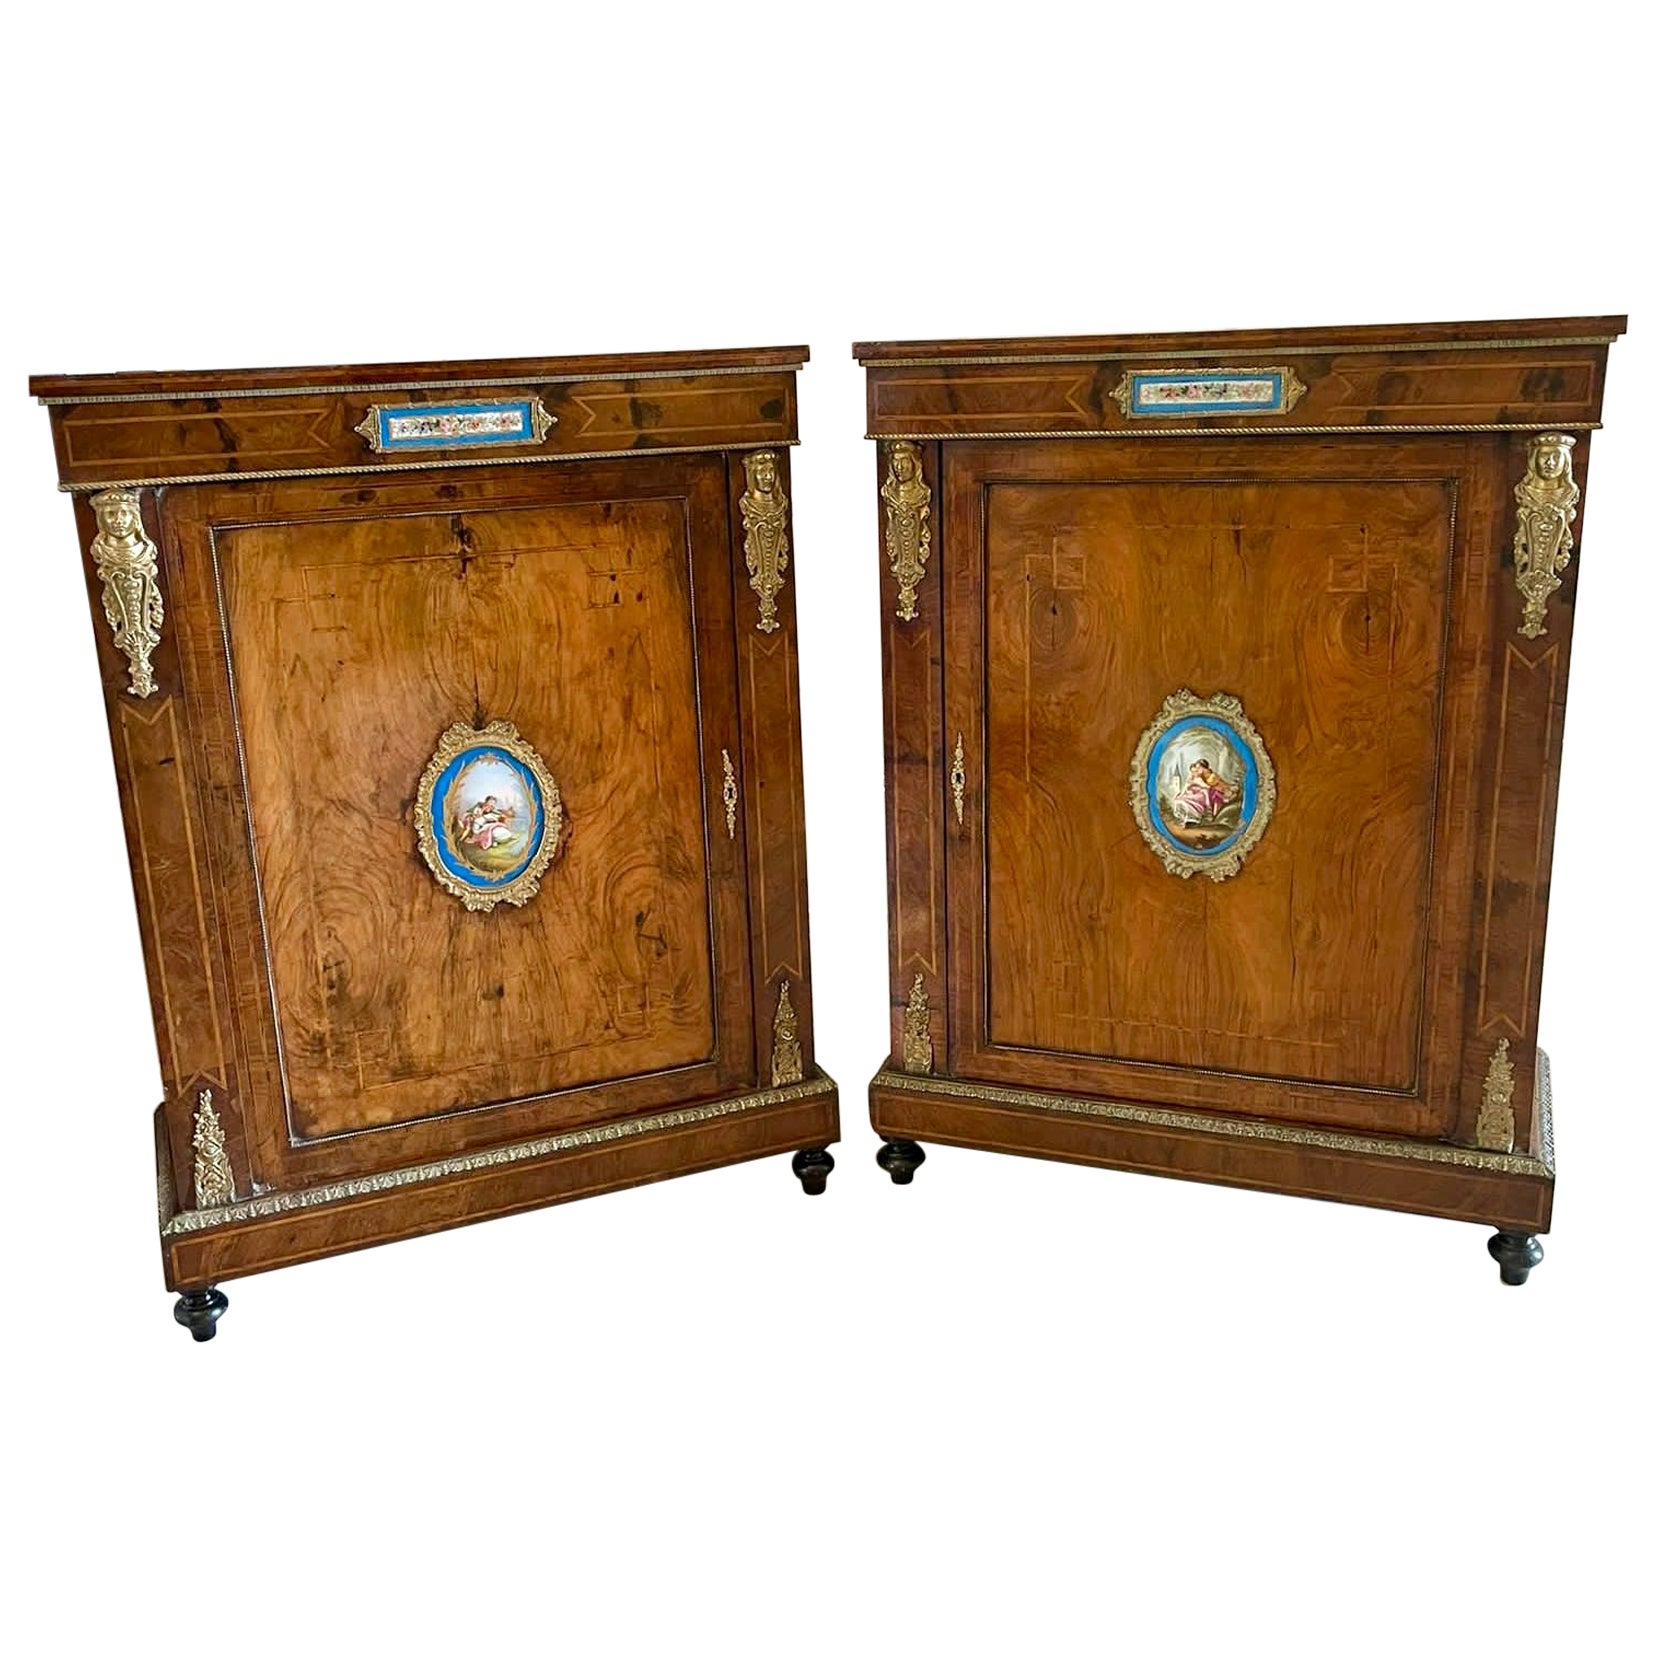 Fantastic Pair of Antique Inlaid Burr Walnut and Porcelain Mounted Pier Cabinets For Sale